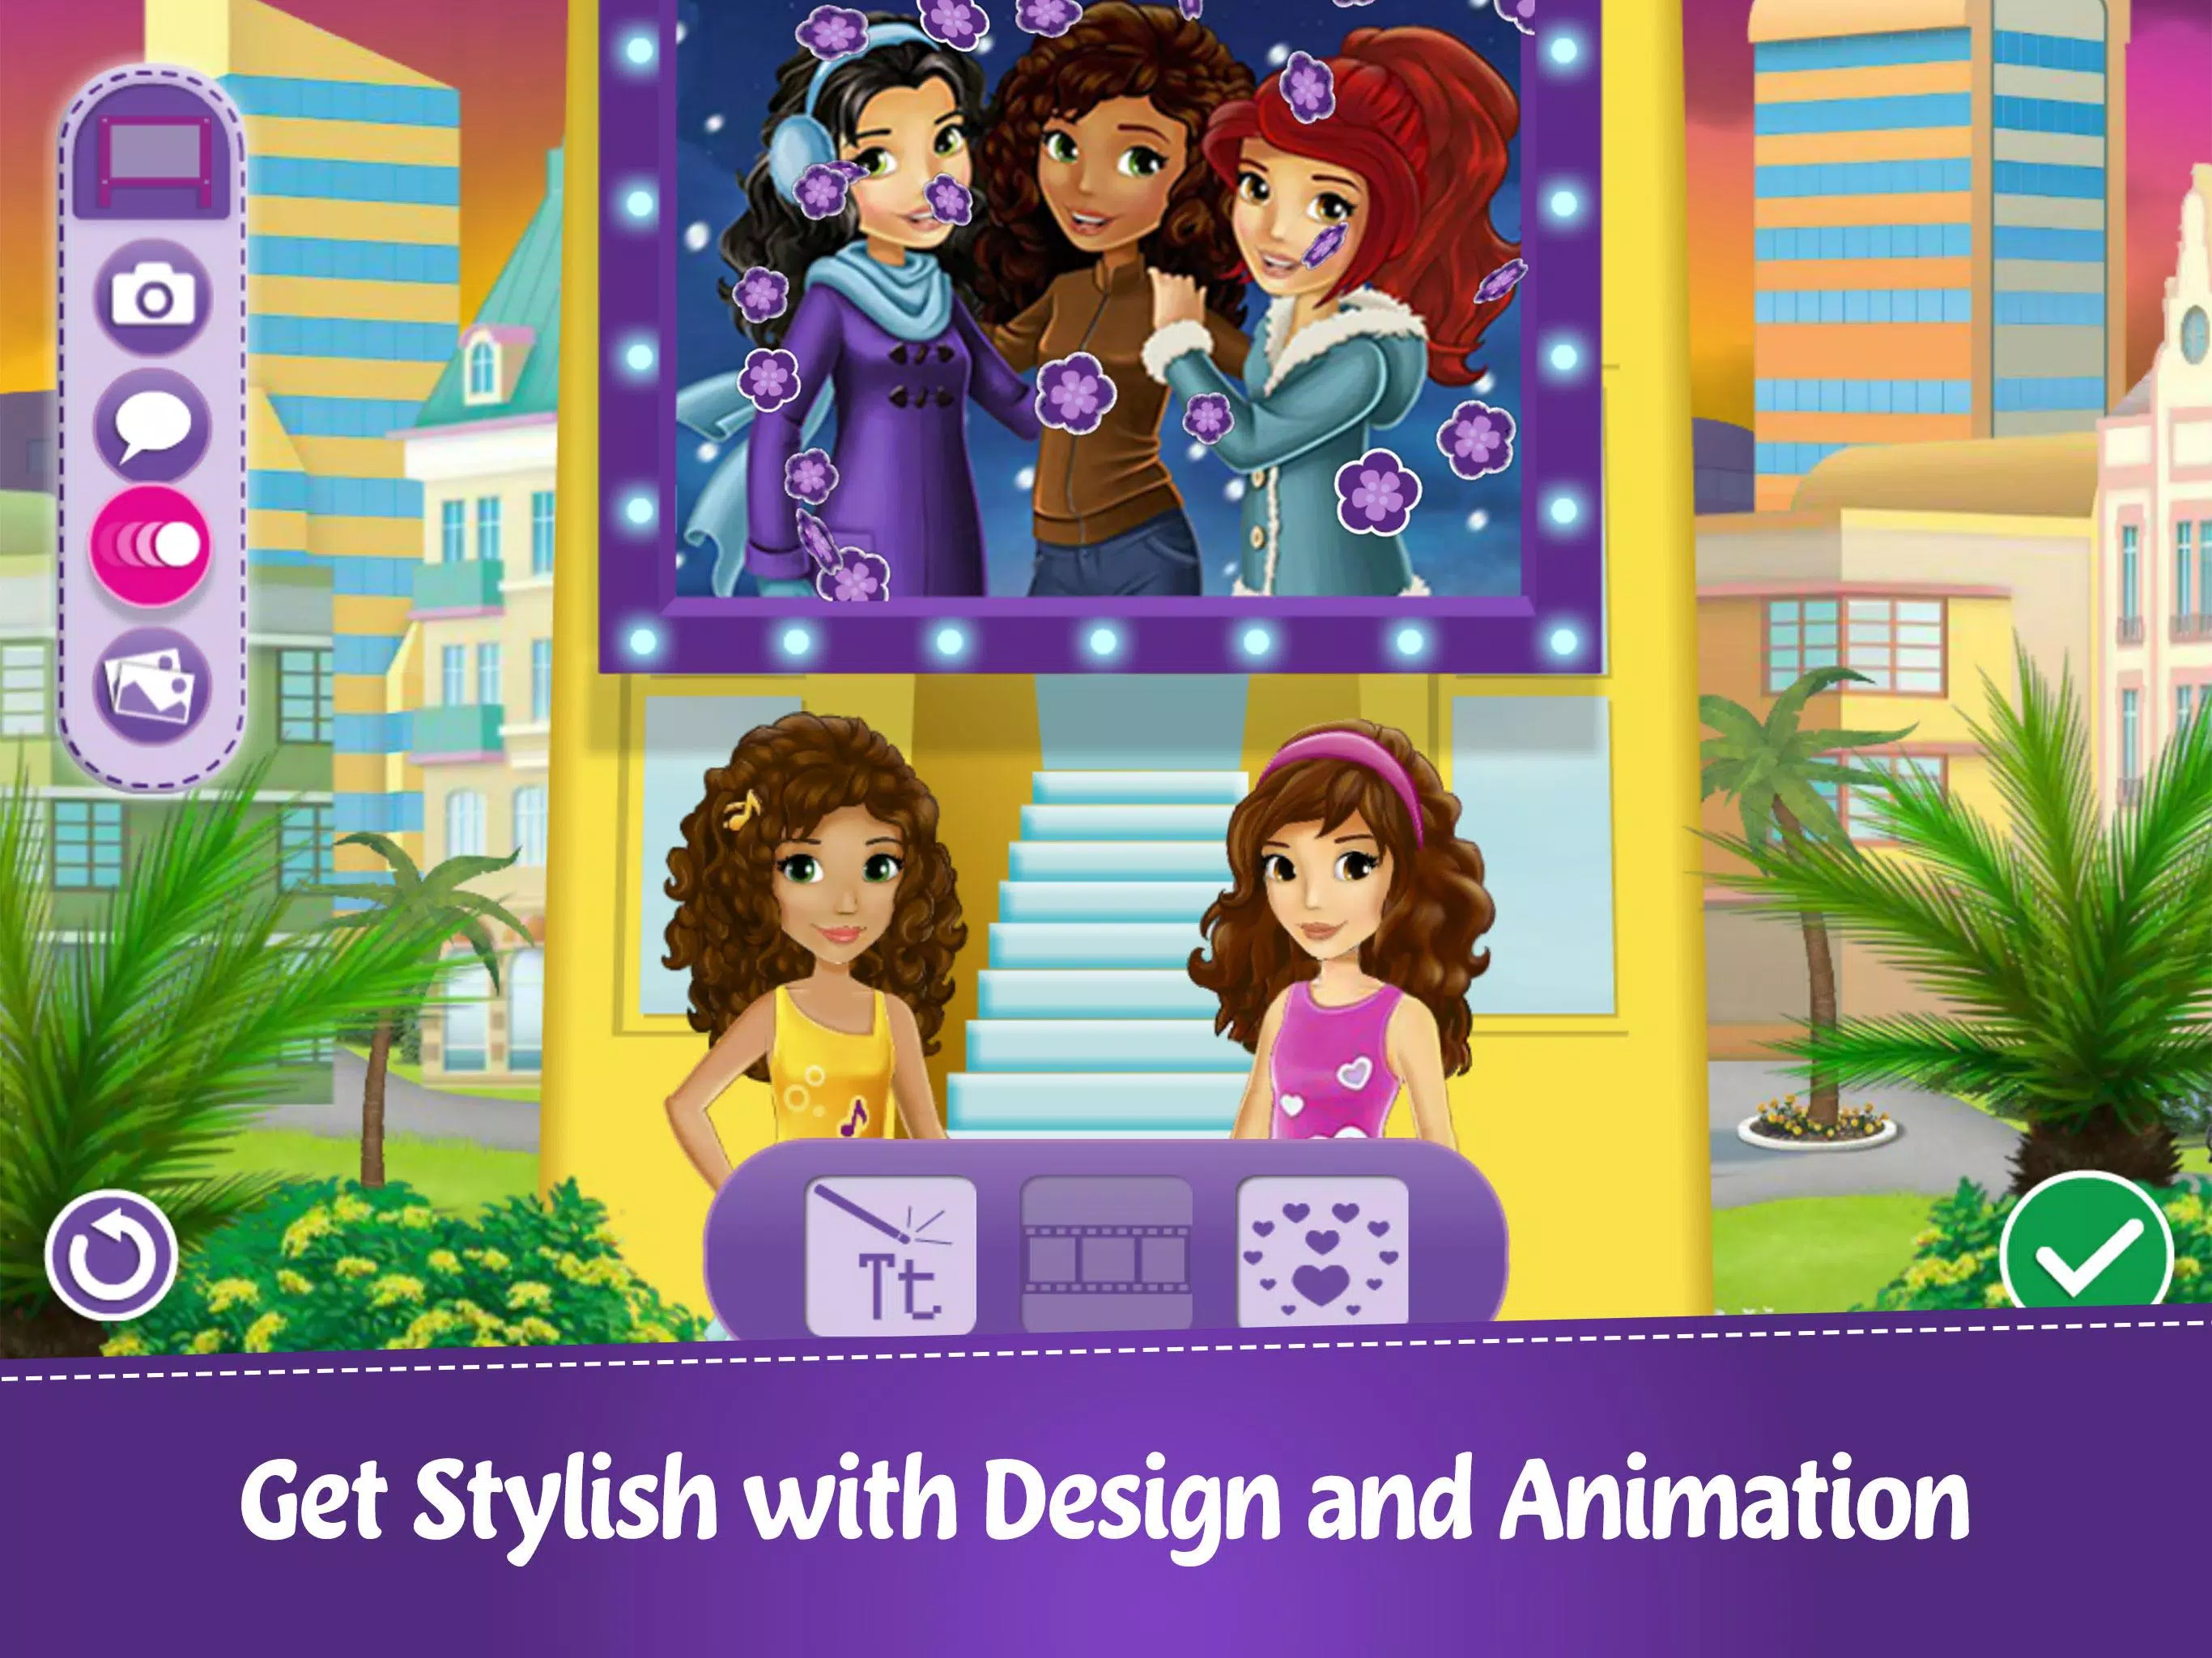 LEGO® Friends Maker Studio for Android - APK Download